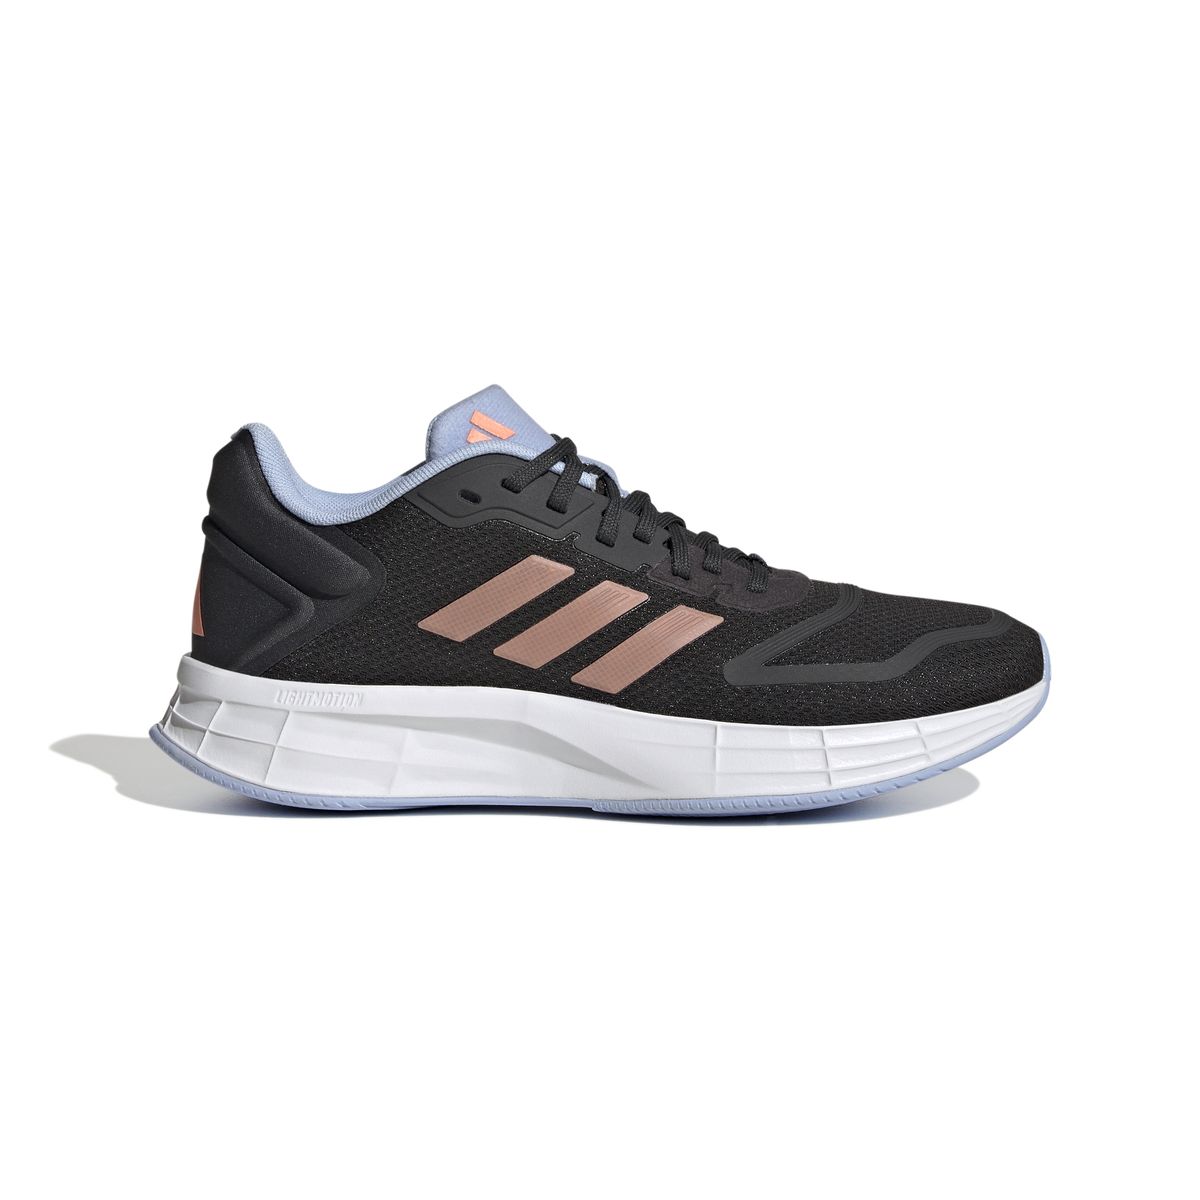 tåge fodbold Indtil adidas Women's Duramo SL 2.0 Running Shoes - Carbon | Buy Online in South  Africa | takealot.com